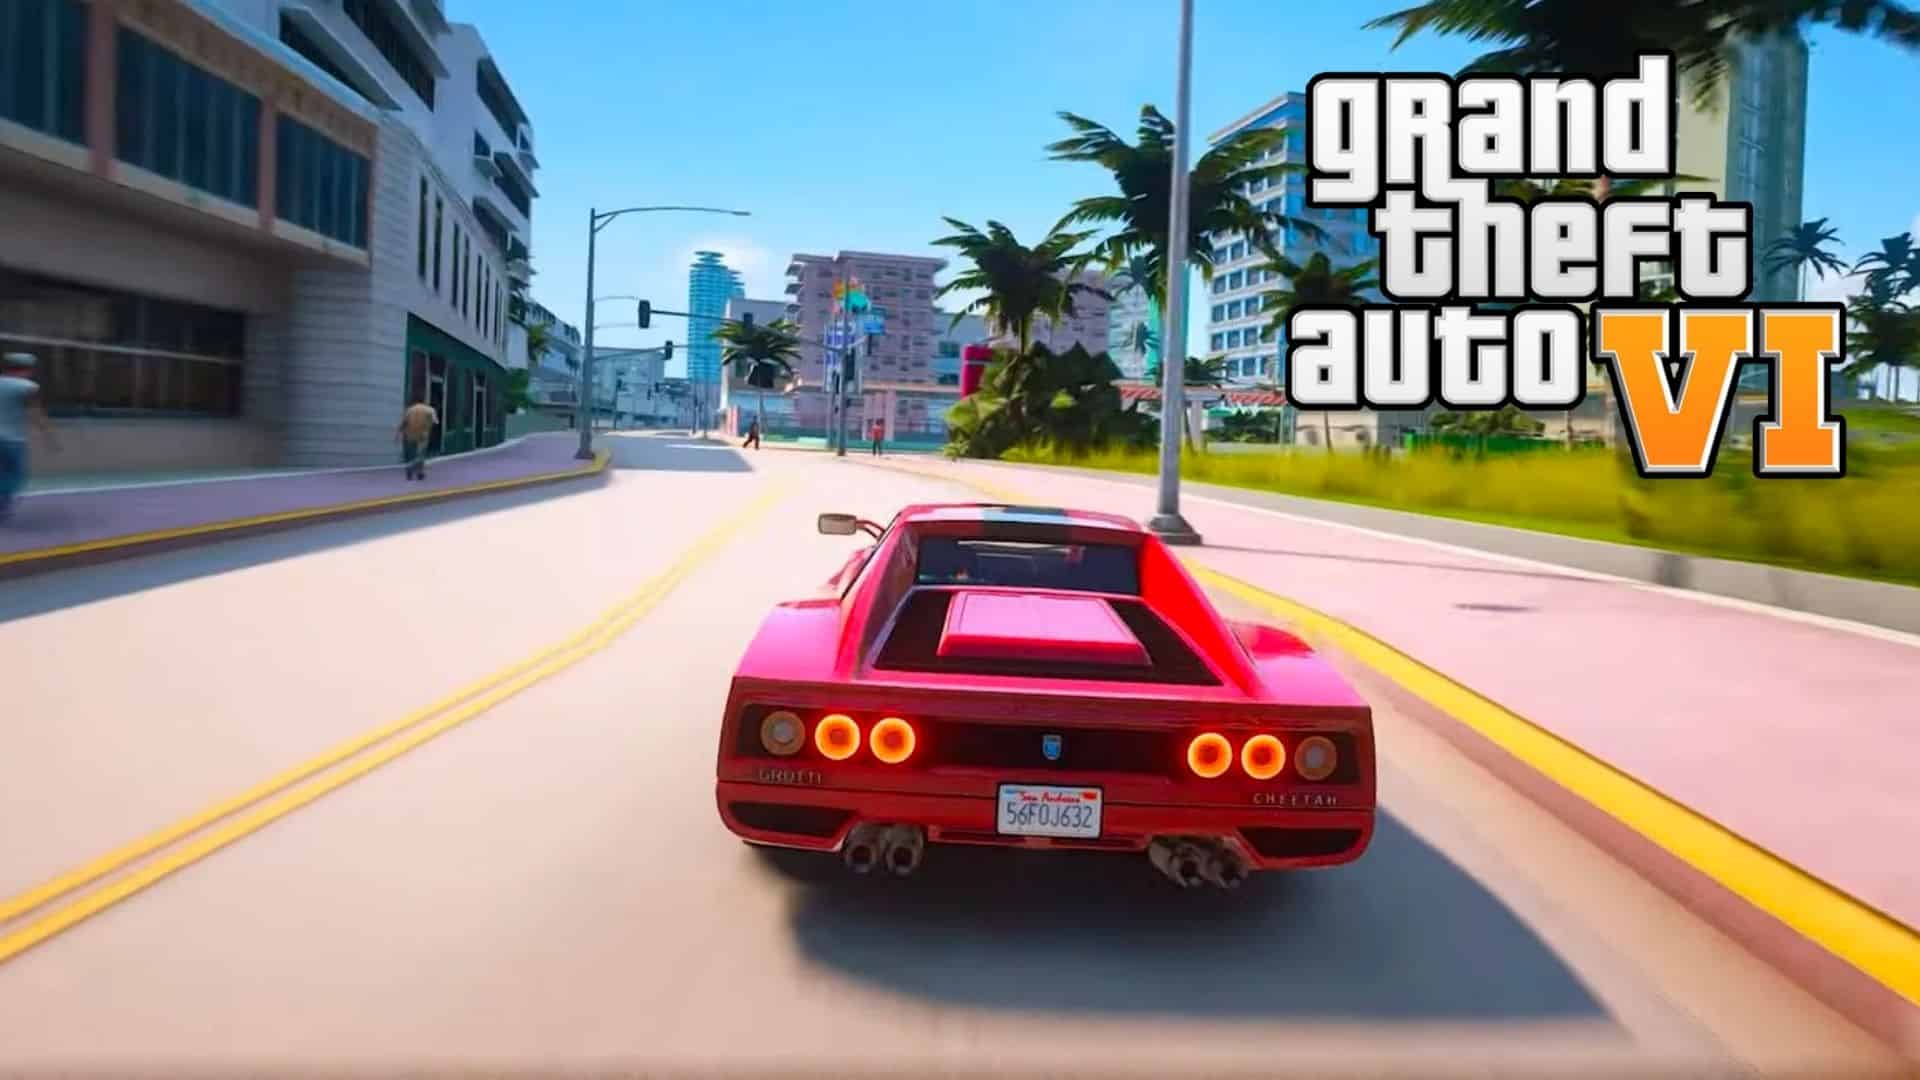 GTA vice city mod with red car and GTA 6 logo